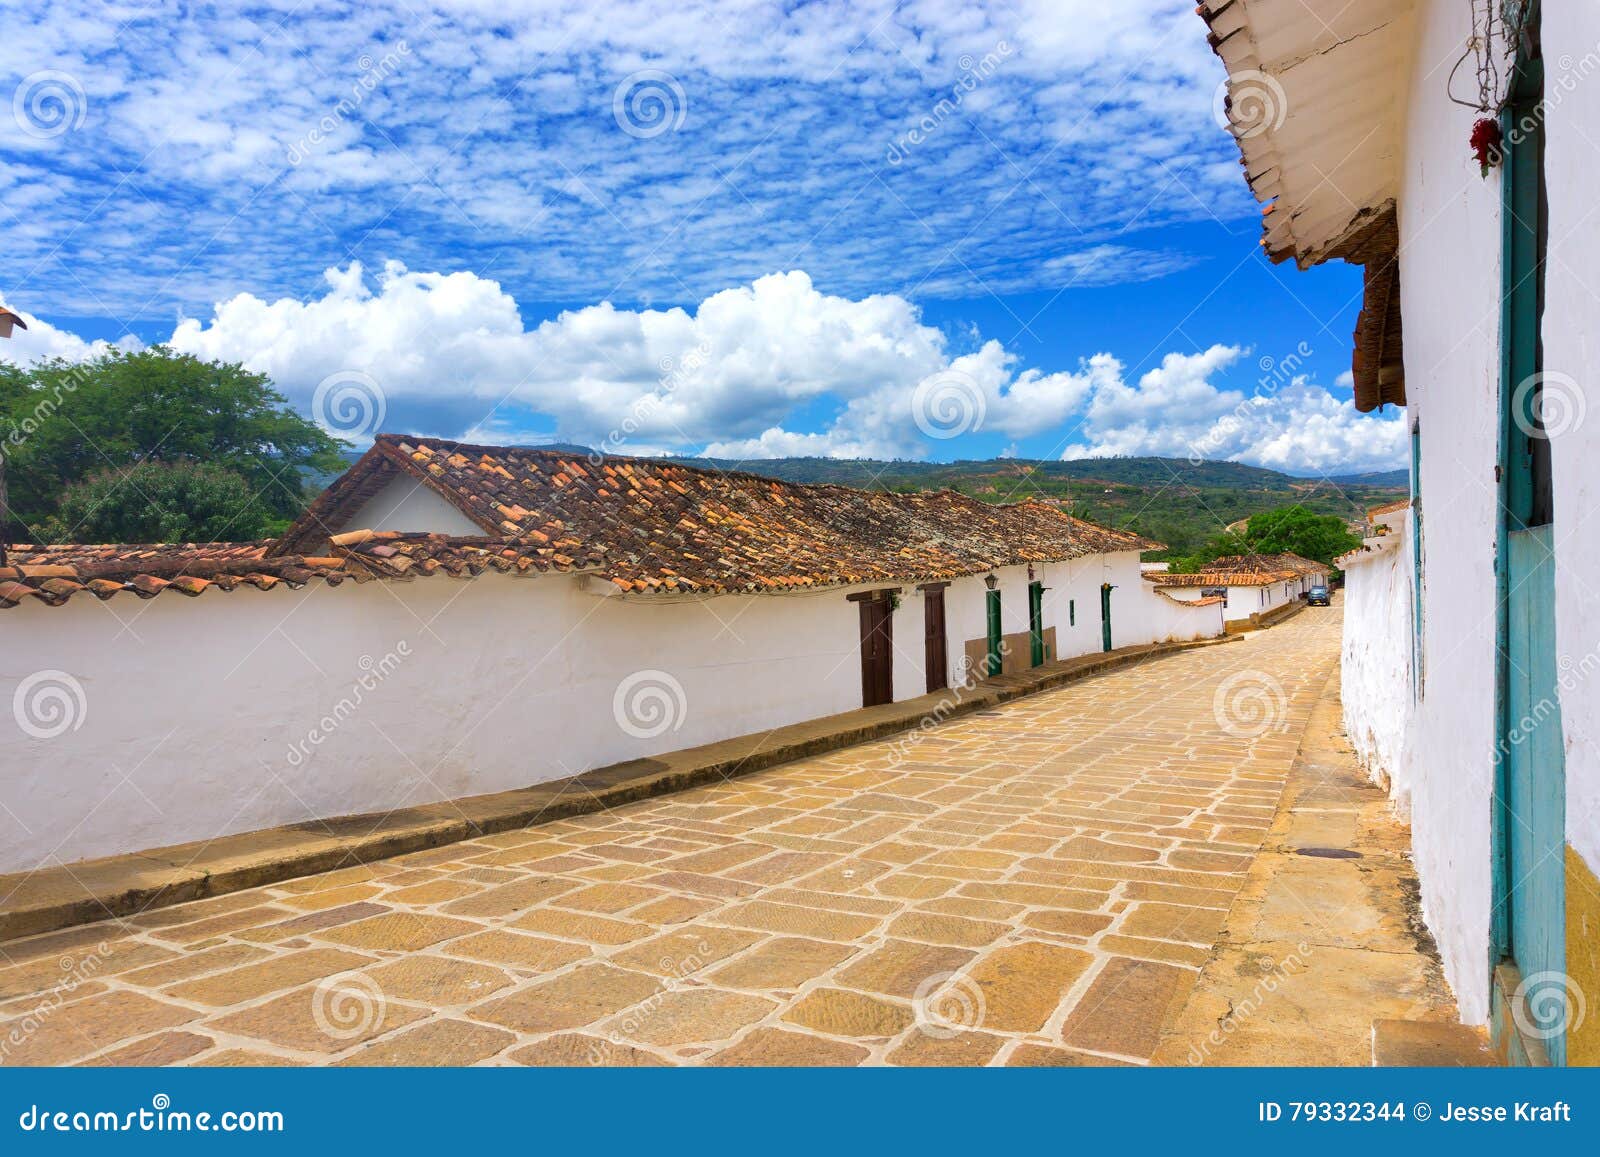 barichara, colombia and blue sky